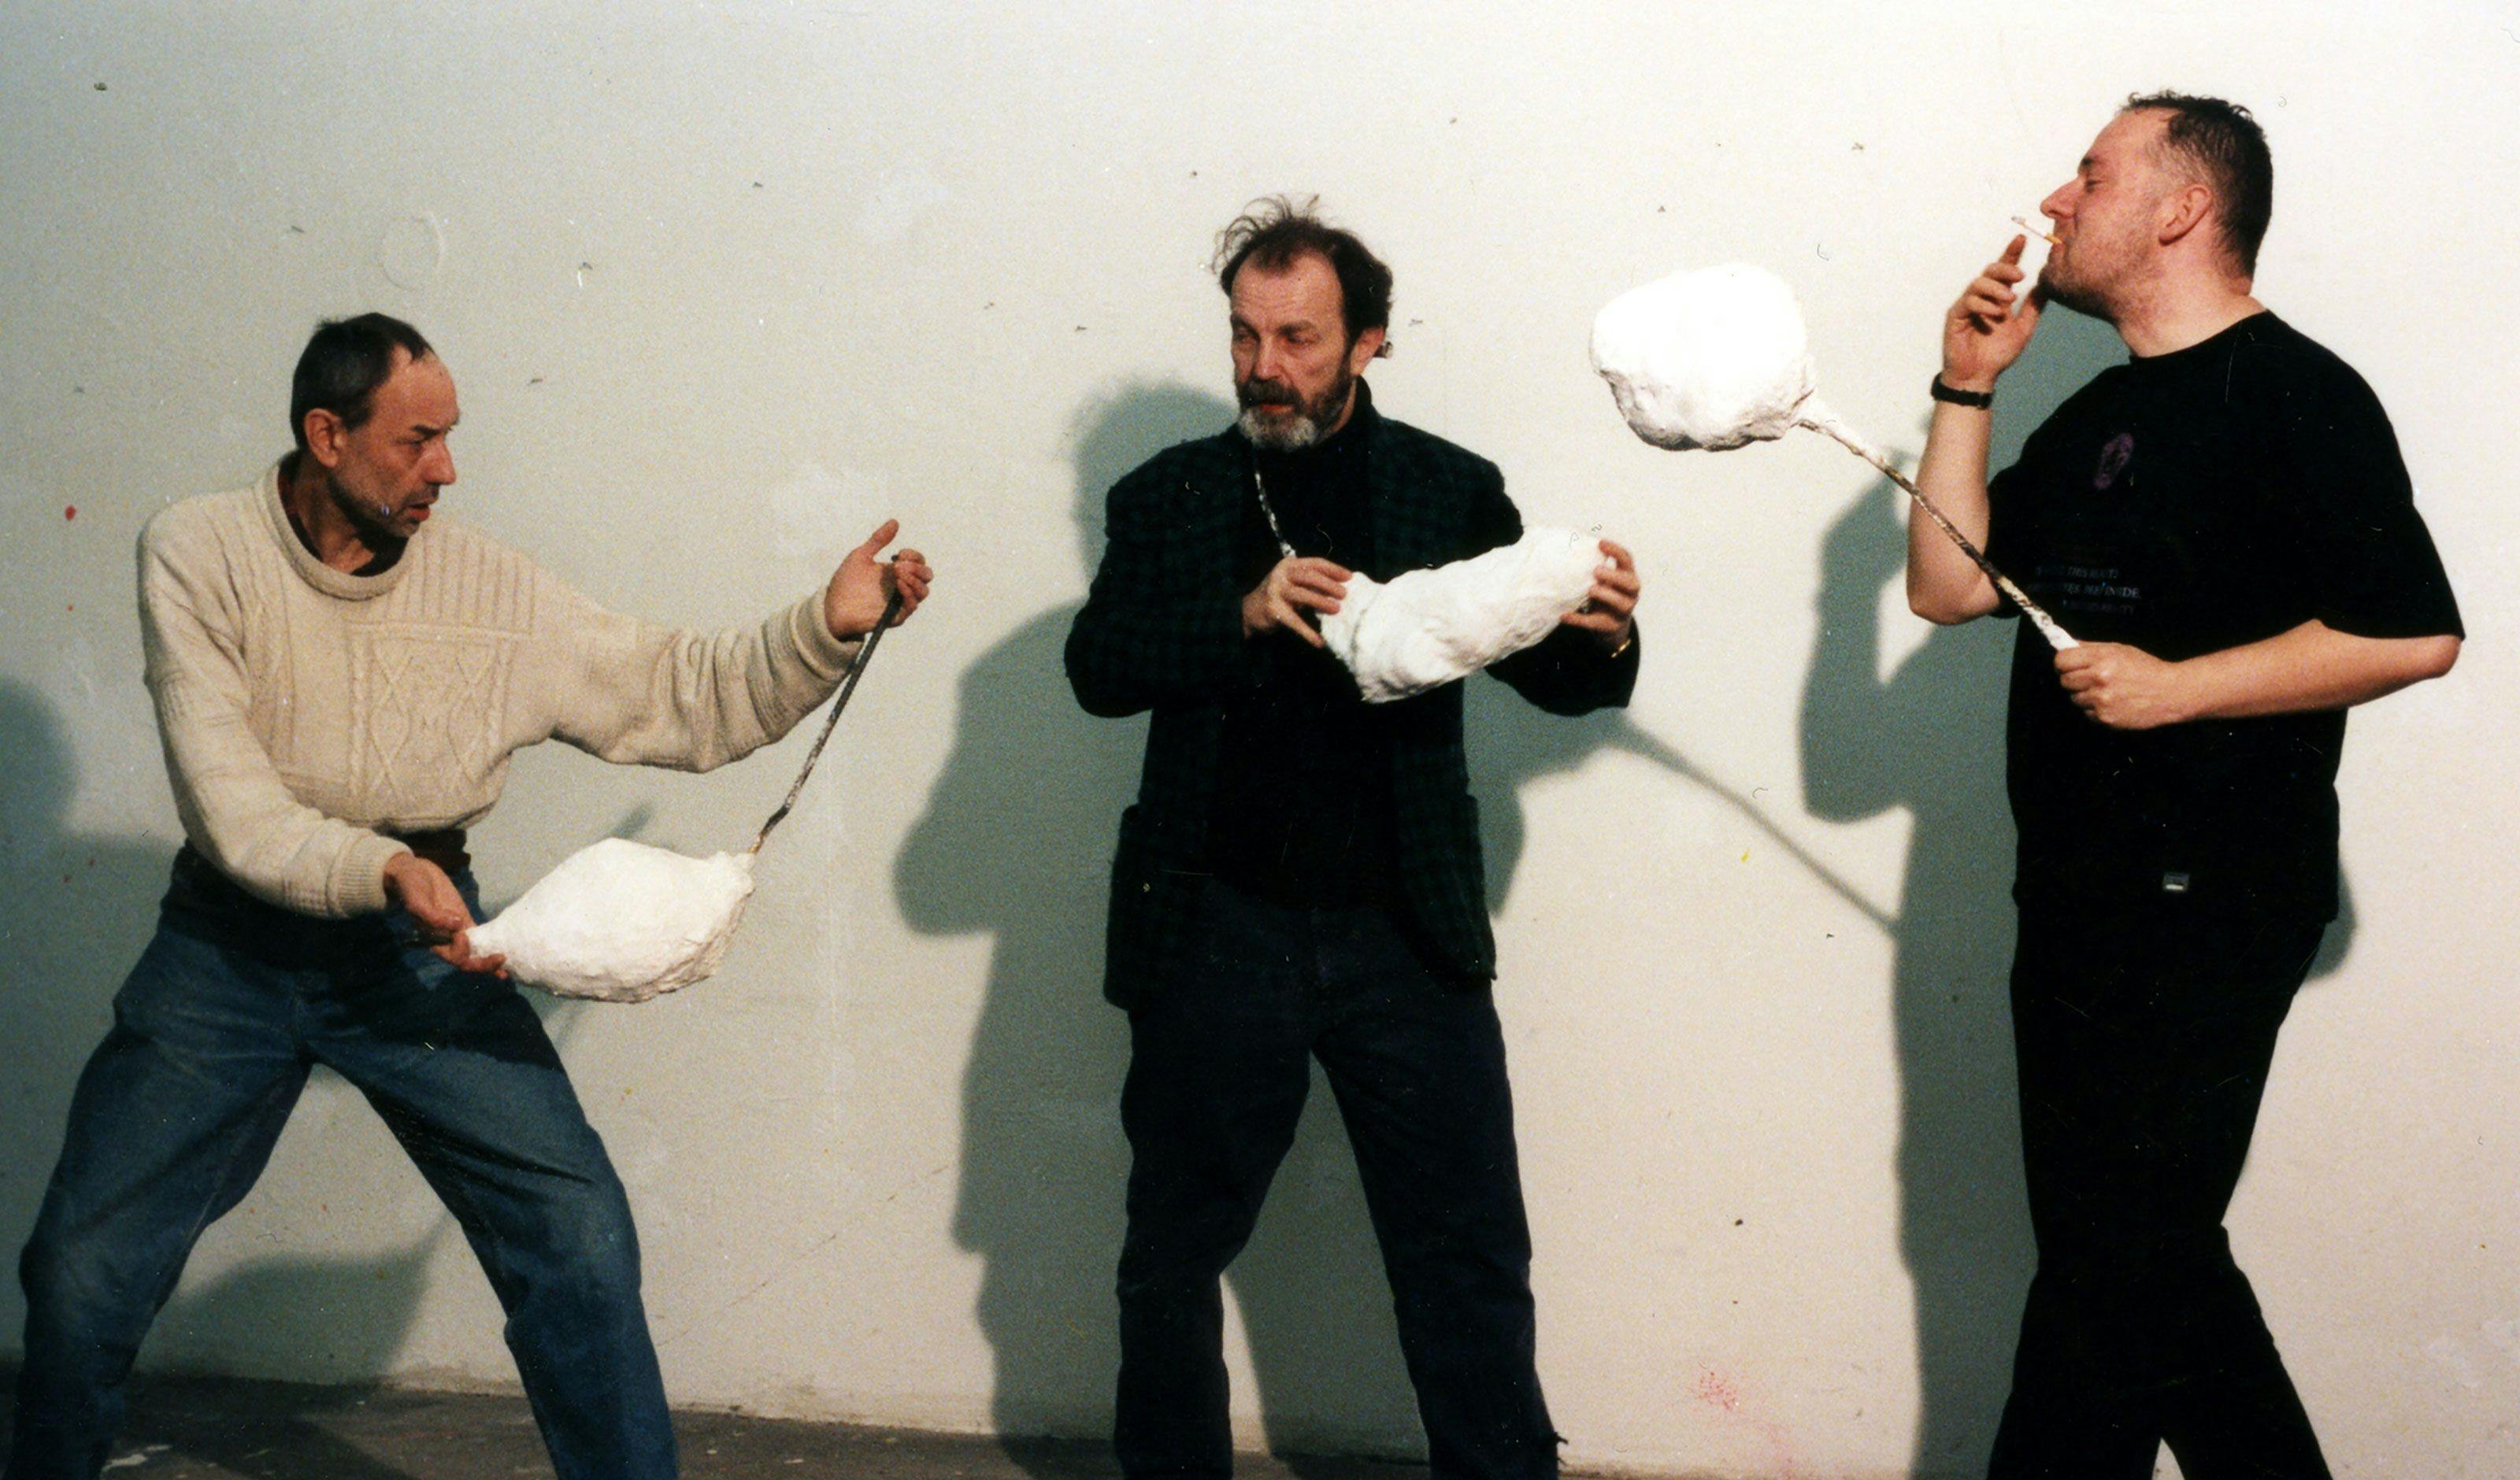 A photograph of Franz West and friends interacting with West's work Passstücke (Adaptives), dated 1998.